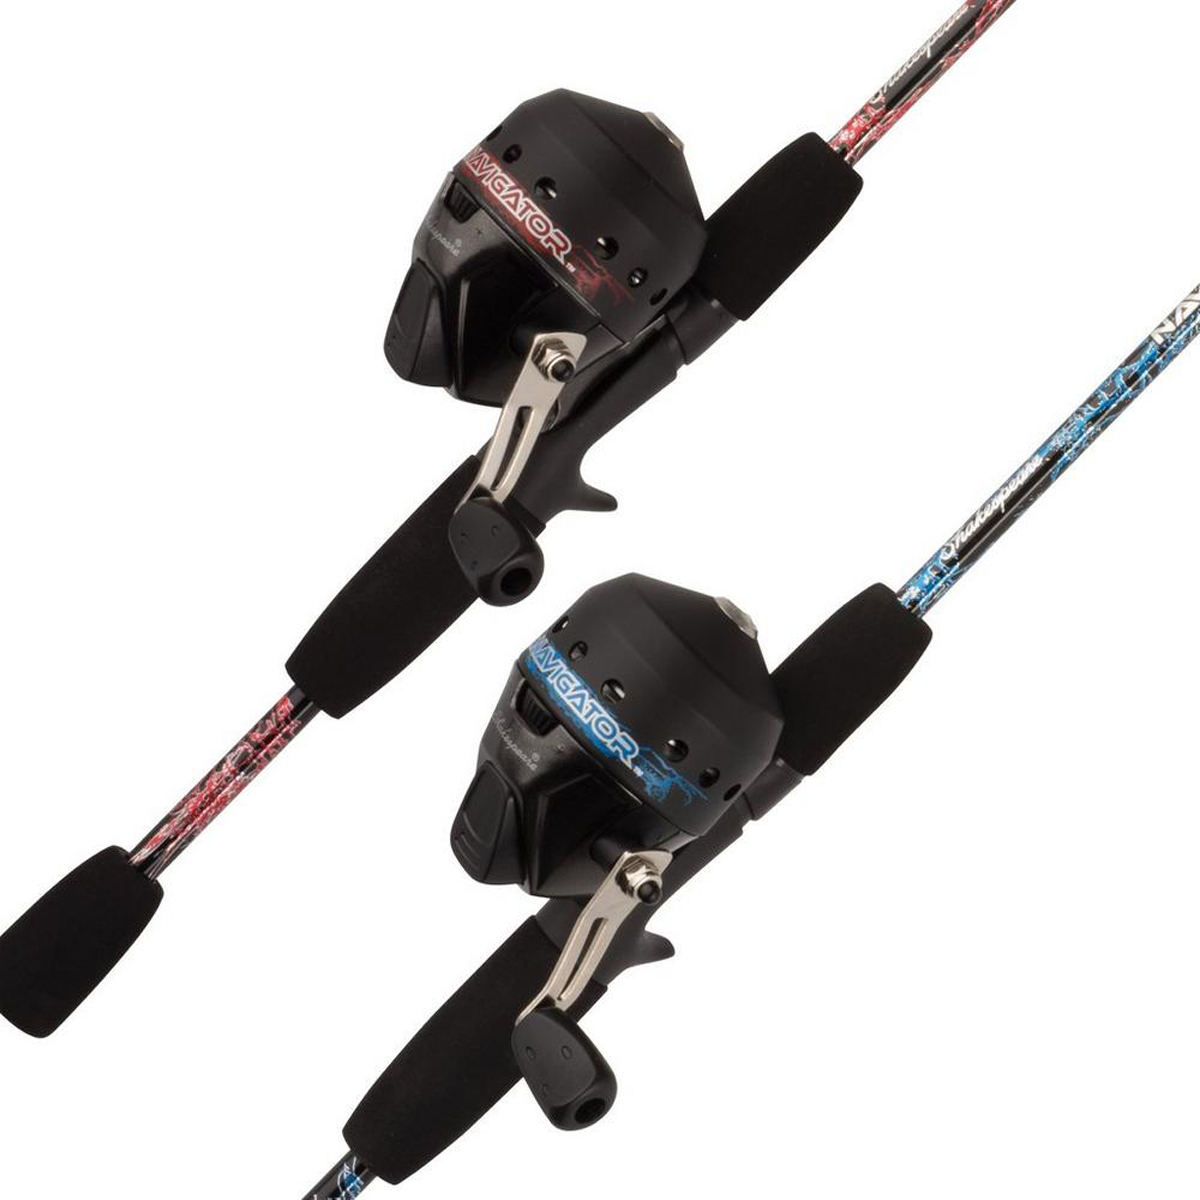 SHAKESPEARE REVERB SPINCAST FISHING ROD AND REEL COMBO NEW RED